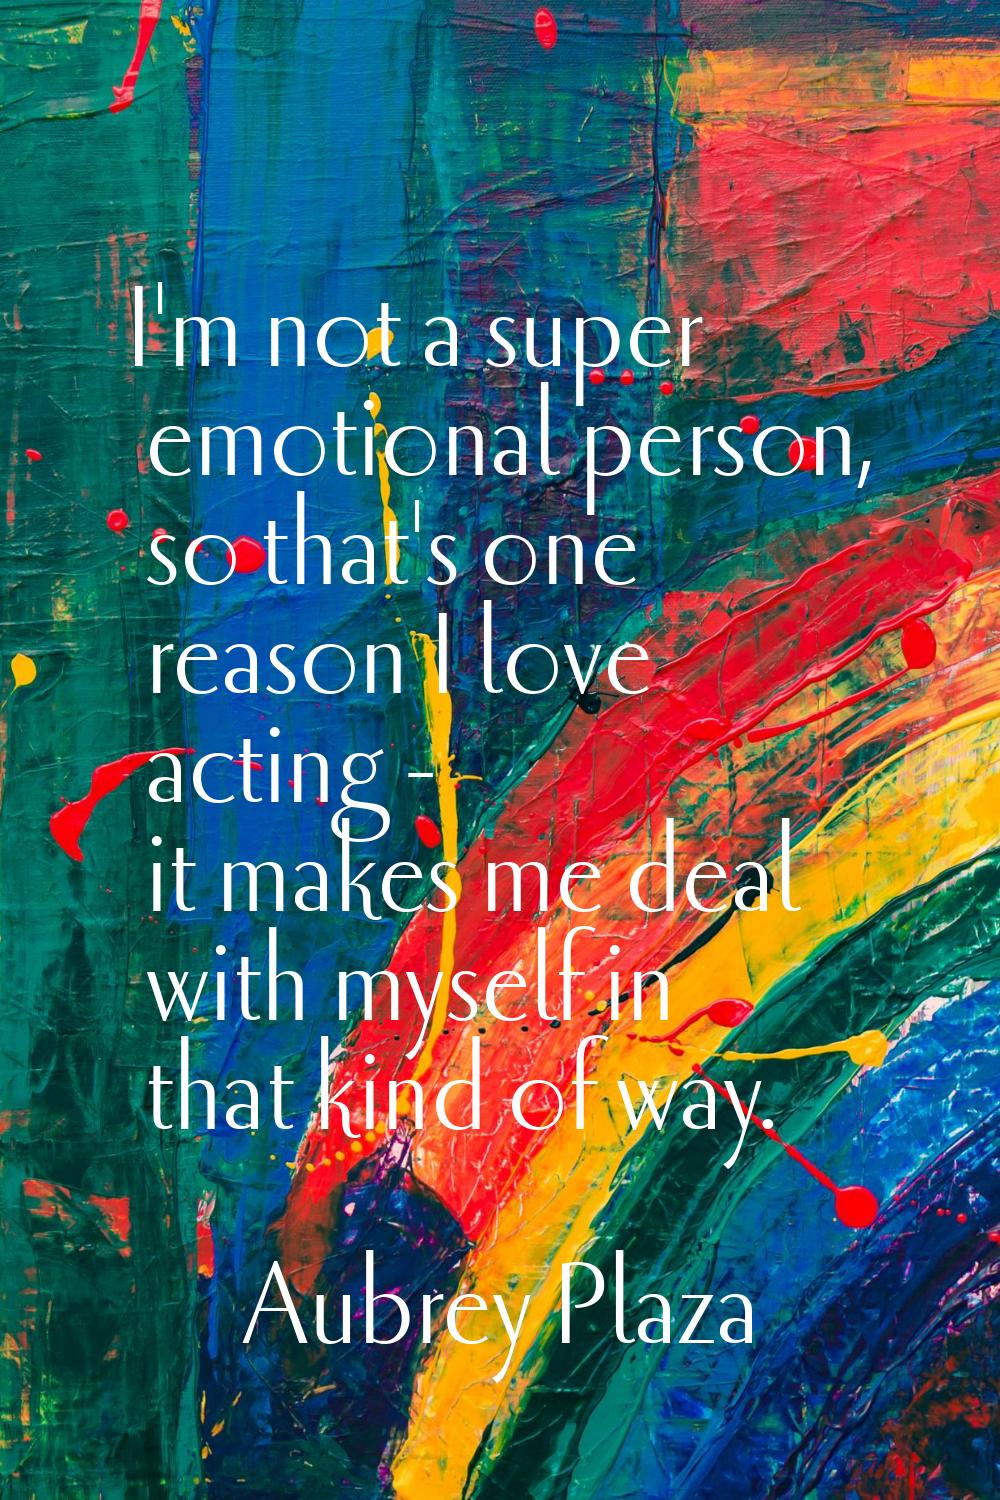 I'm not a super emotional person, so that's one reason I love acting - it makes me deal with myself